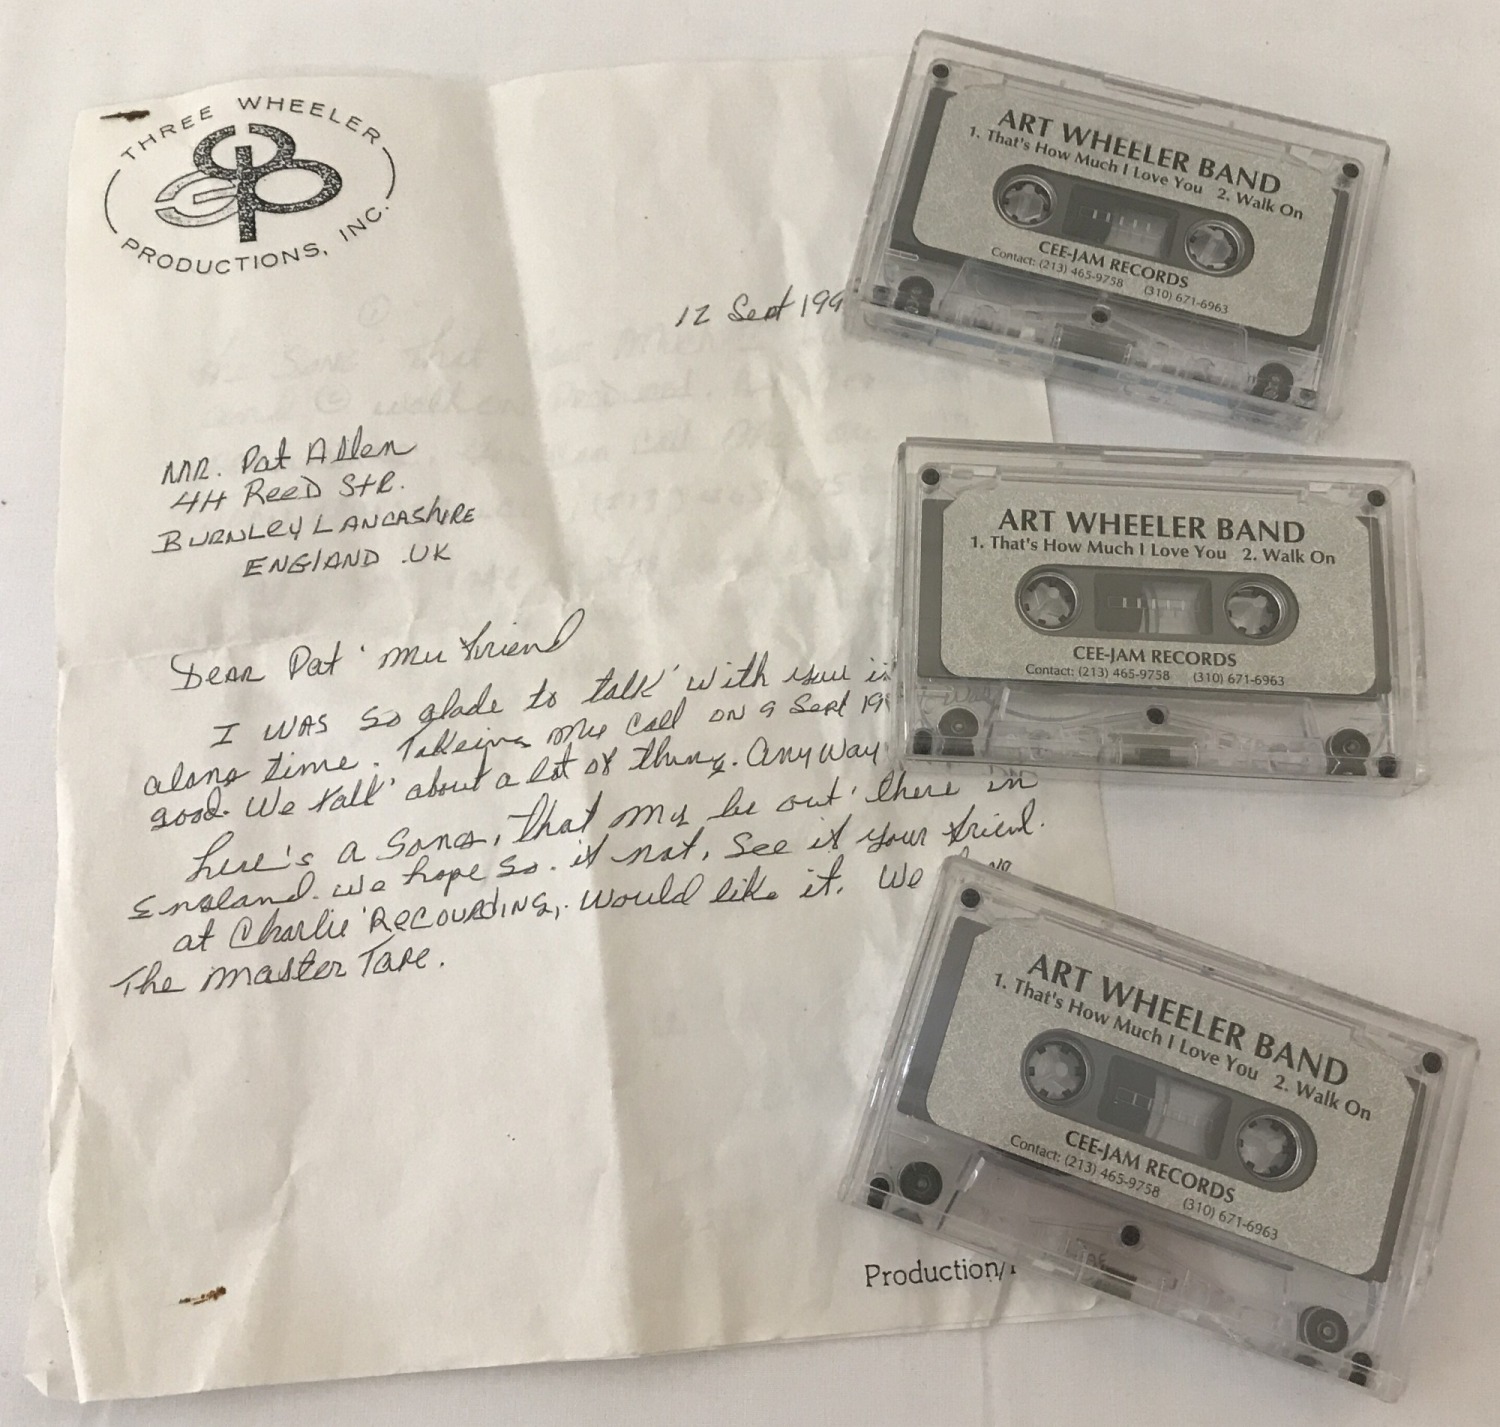 3 promotional Art Wheeler Band cassette tapes together with accompanying record company letter.